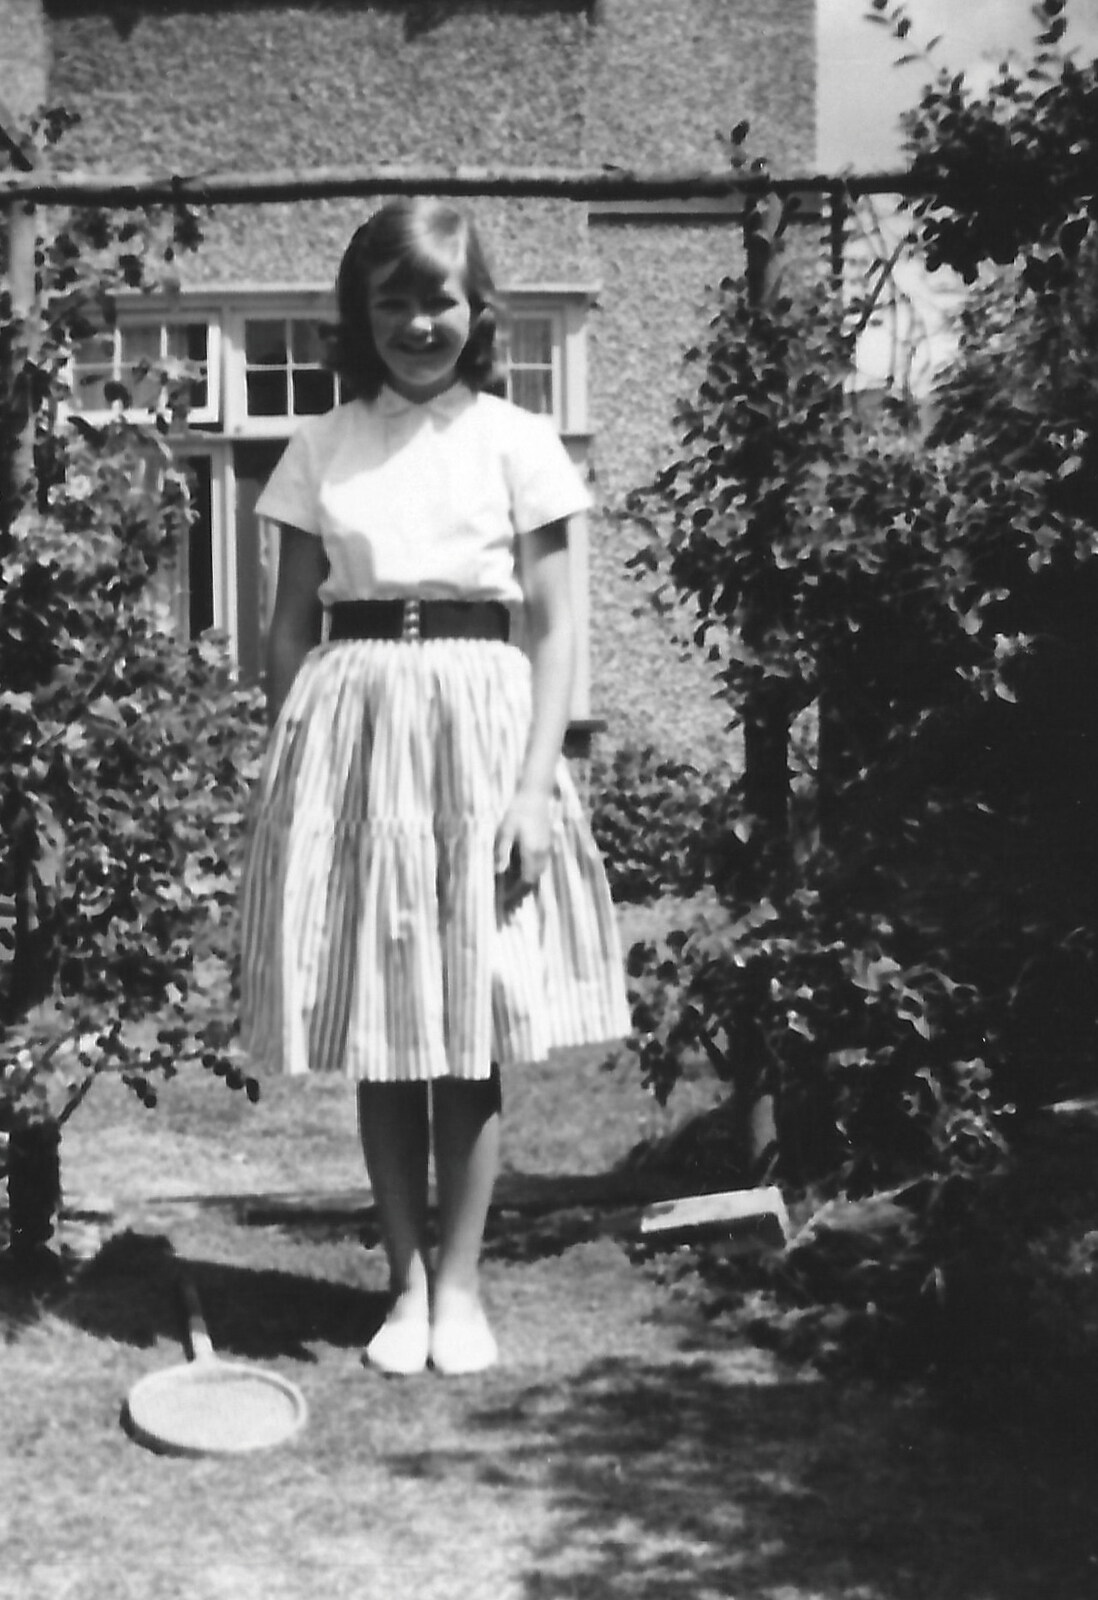 Janet, aged 14? from Family History: The 1940s and 1950s - 24th January 2020